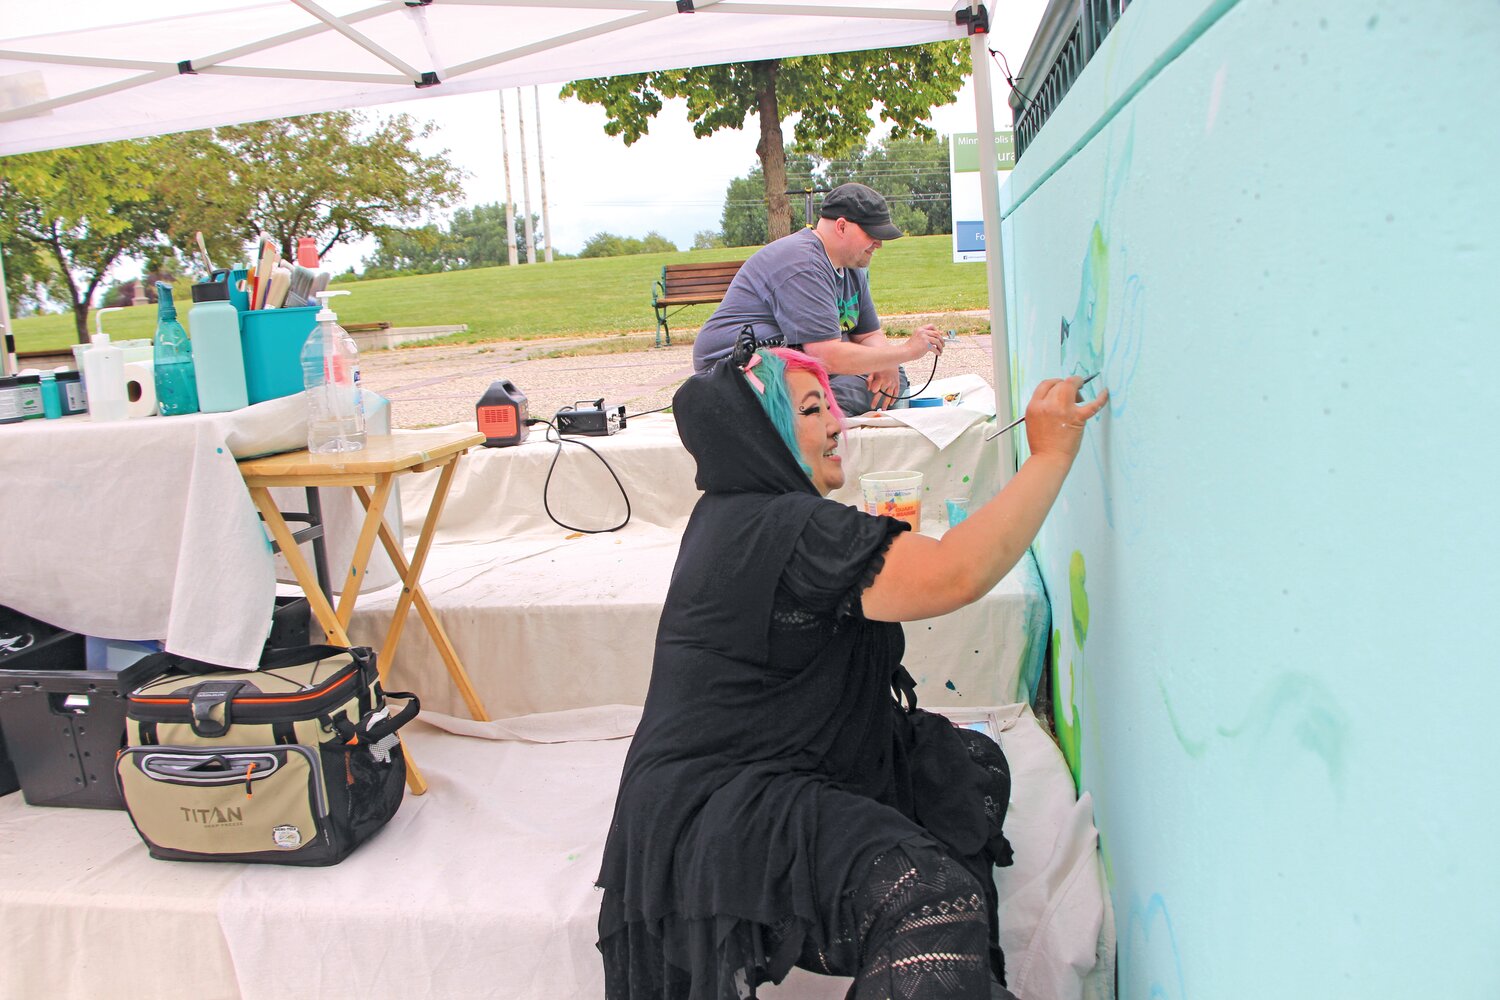 Artists Kao Lee Thao and Ash Kubesh work on a mural at Boom Island Park that fills two sides of a concrete wall near the river. Thao painted a woman on one side of the mural wall. “Over there she symbolizes mother nature and earth,” Thao said. “When you see a woman in my pieces, it’s like she’s a storyteller. Like she’s telling a story about the importance of water and parks and nature.” She described how in Hmong culture, women often hand stitch their clothing and costumes. The woman Thao painted in bright colors on the mural, is inspired by and in honor of Hmong women.